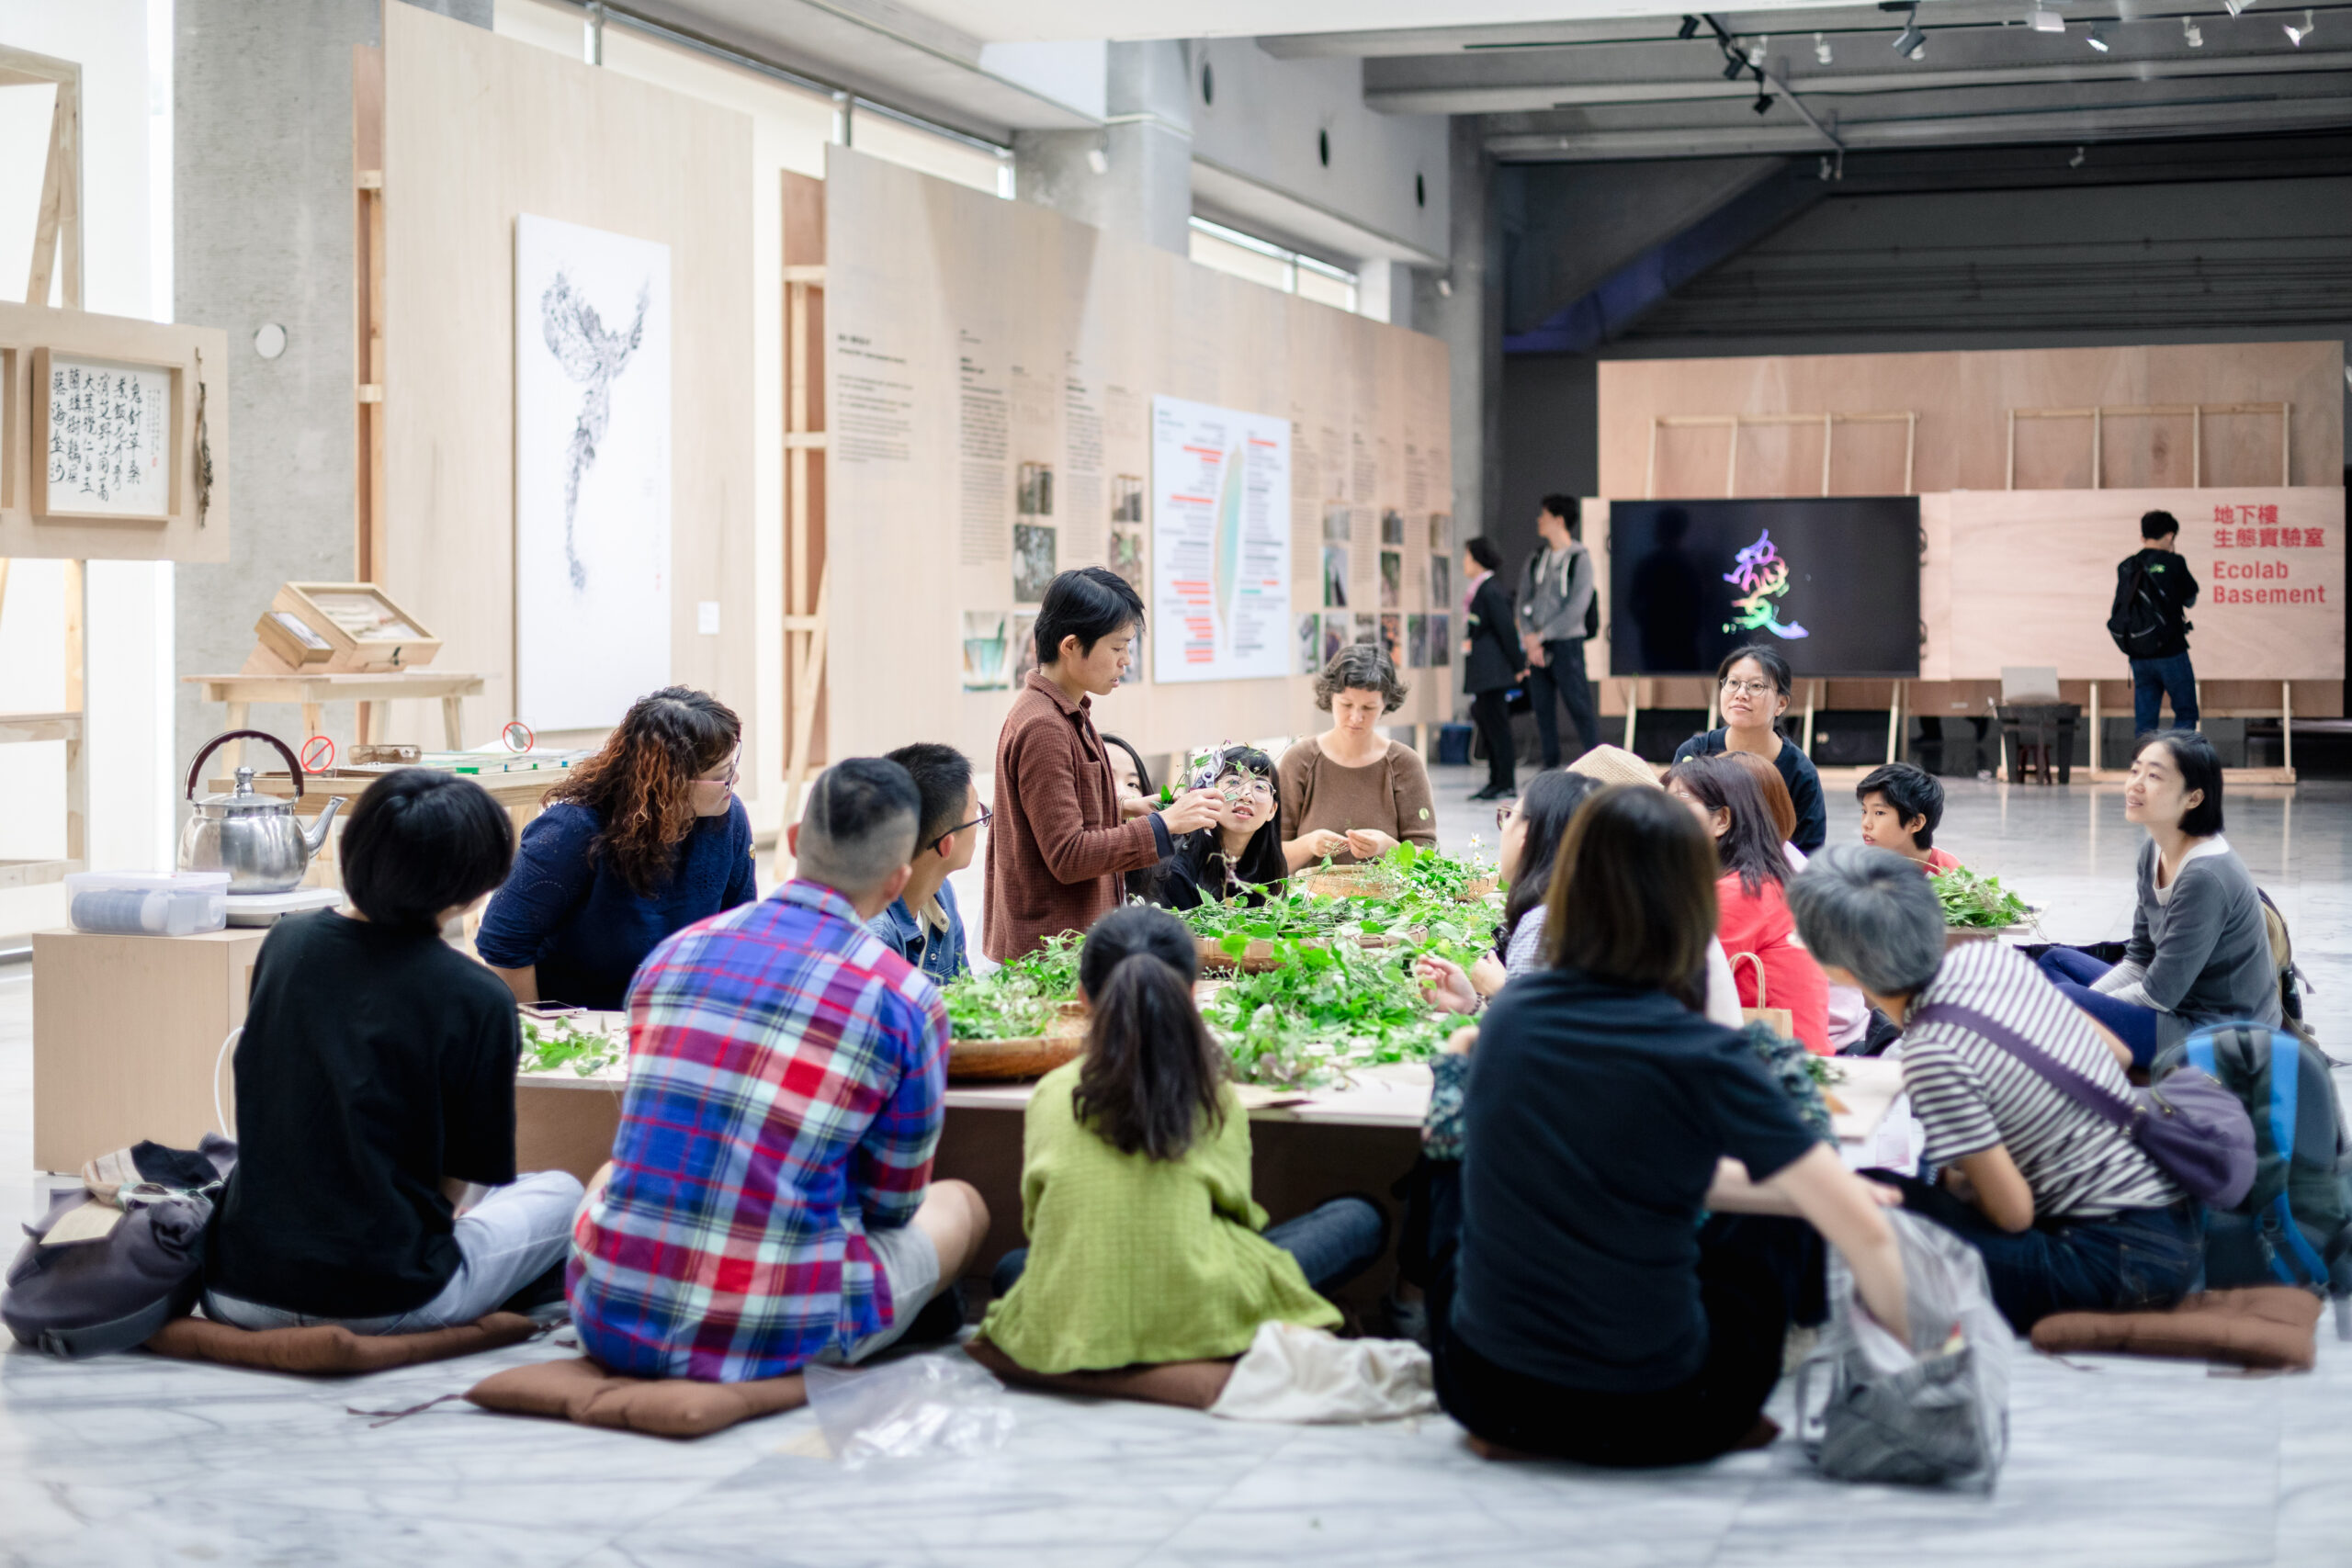 In a light wood paneled art space an individual in a brown shirt holds a handful of leaves in front of a dozen people sitting on floor cushions around a table covered with mounds of foraged greens.